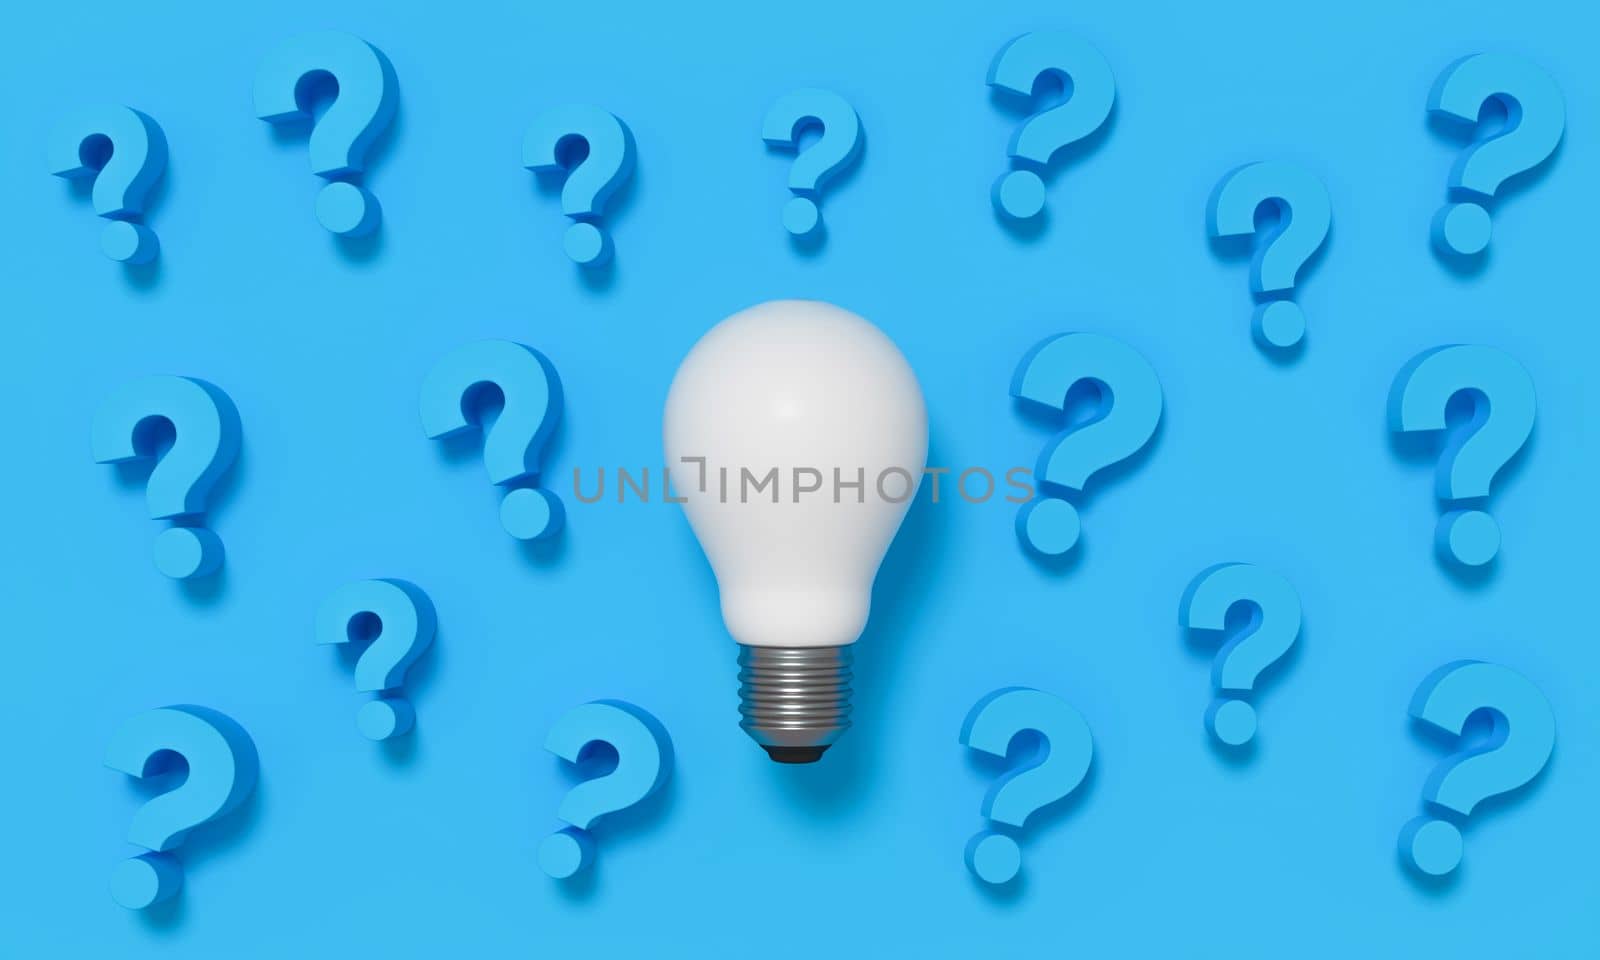 Light bulb with question mark on blue pattern background. 3D rendering.